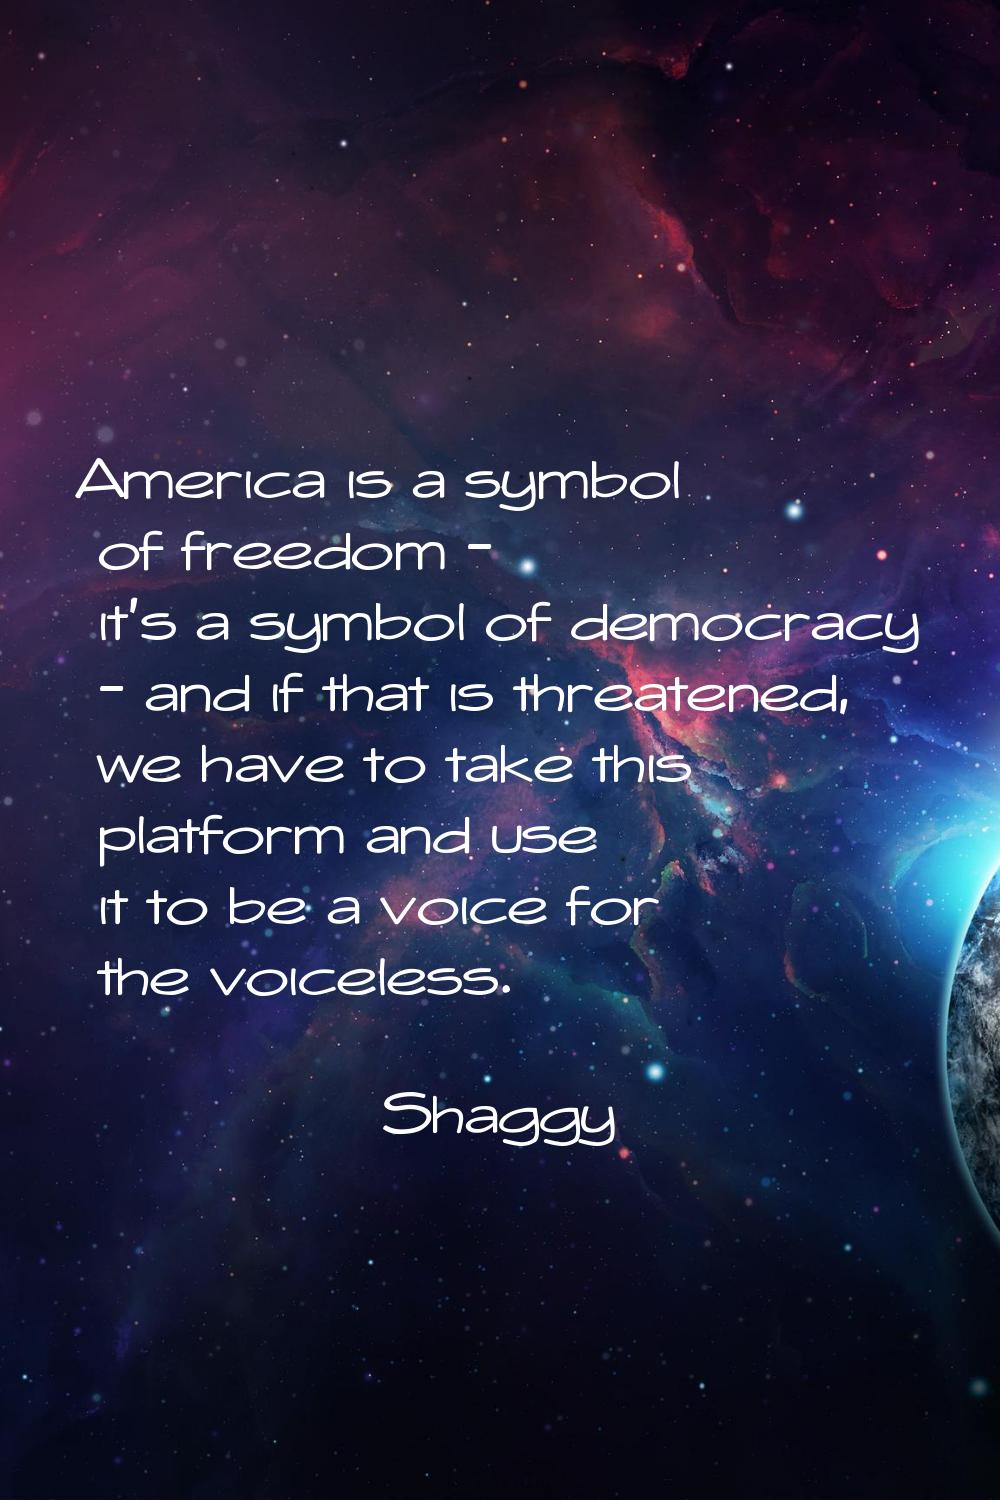 America is a symbol of freedom - it's a symbol of democracy - and if that is threatened, we have to